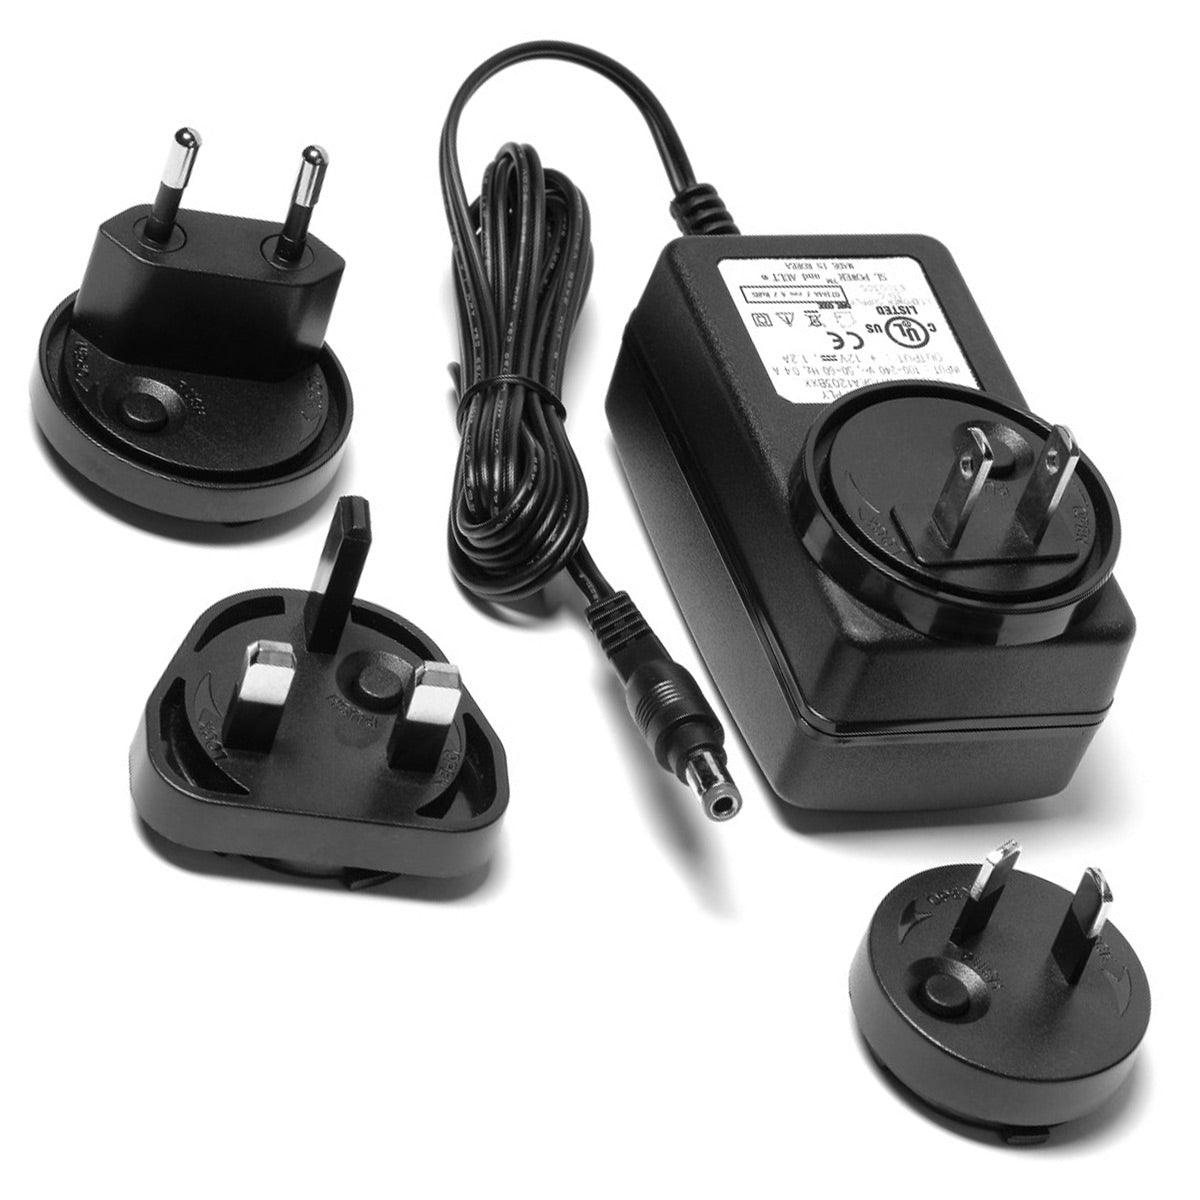 AC Power Supply with Cord (and International Plug Adapters) for Transcend 2 & 3 CPAP Machines